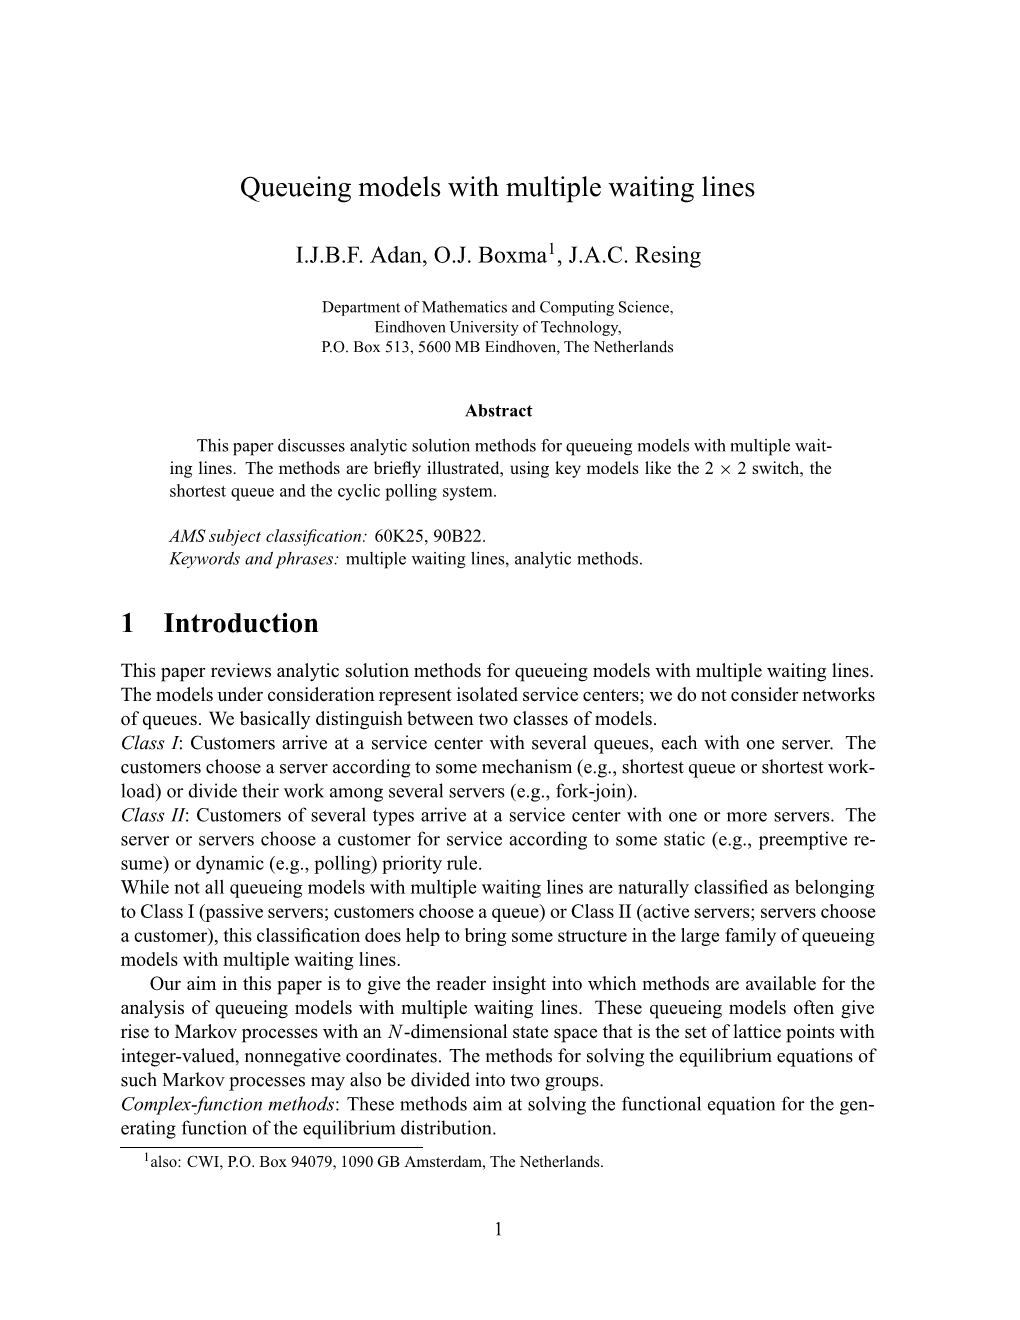 Queueing Models with Multiple Waiting Lines 1 Introduction